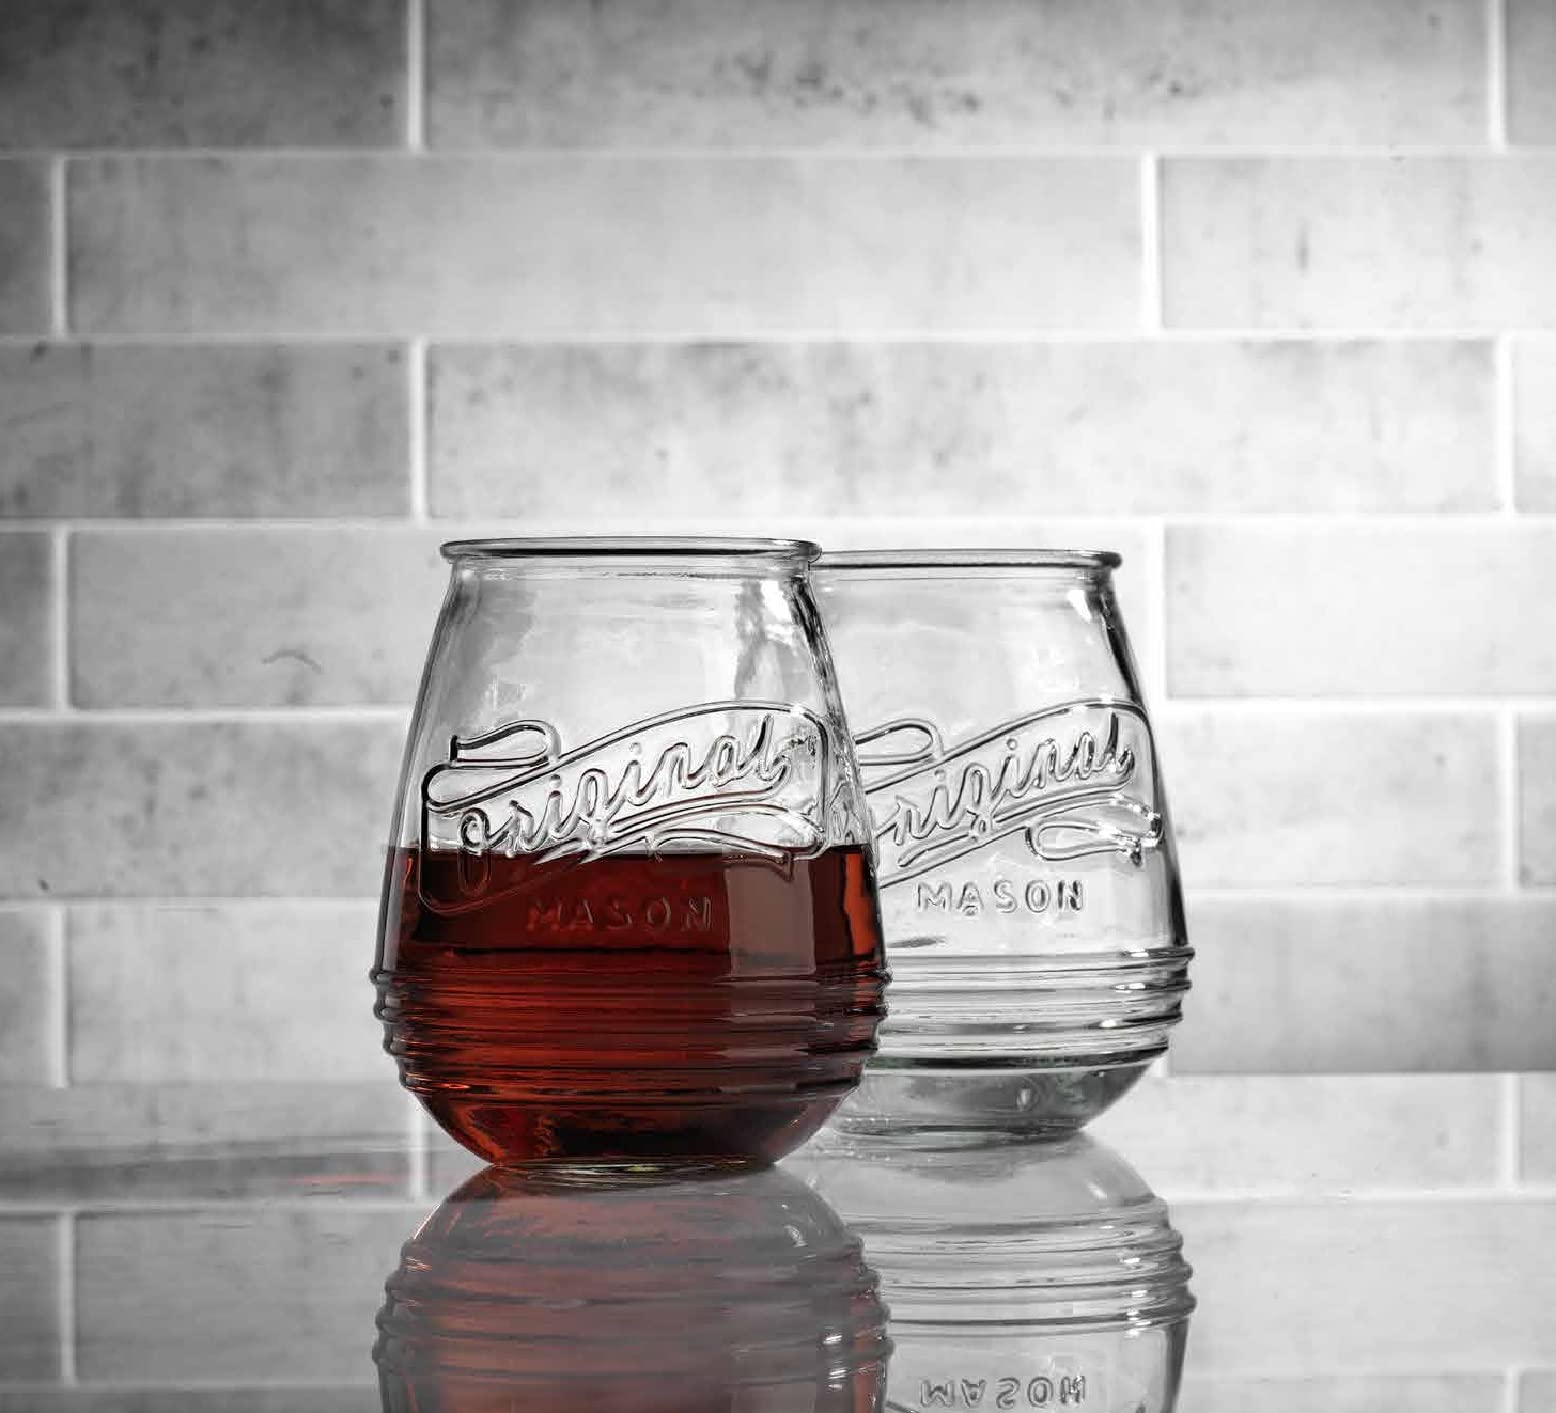 Wine Glasses Set Of 4 Stemless Glasses 210z. Original Mason Large Wine Cup, Red and White Wine Drinking Water Glasses. Juice, Cocktails, Smoothies, Vintage Bar Glasses  - Acceptable